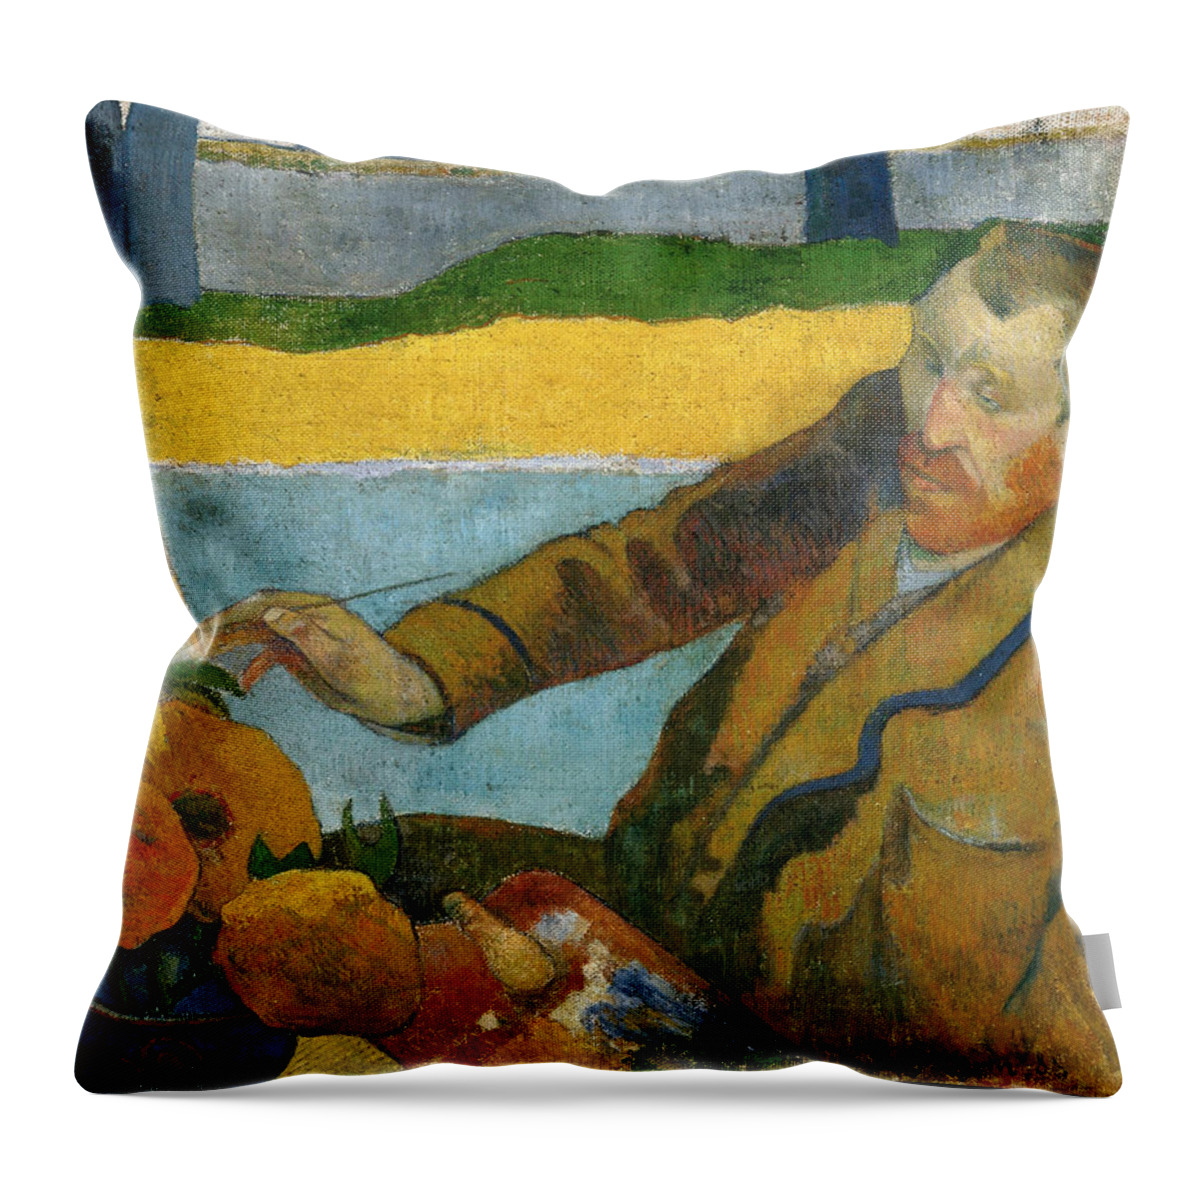 Paul Gauguin Throw Pillow featuring the painting Vincent Van Gogh Painting Sunflowers #3 by Paul Gauguin